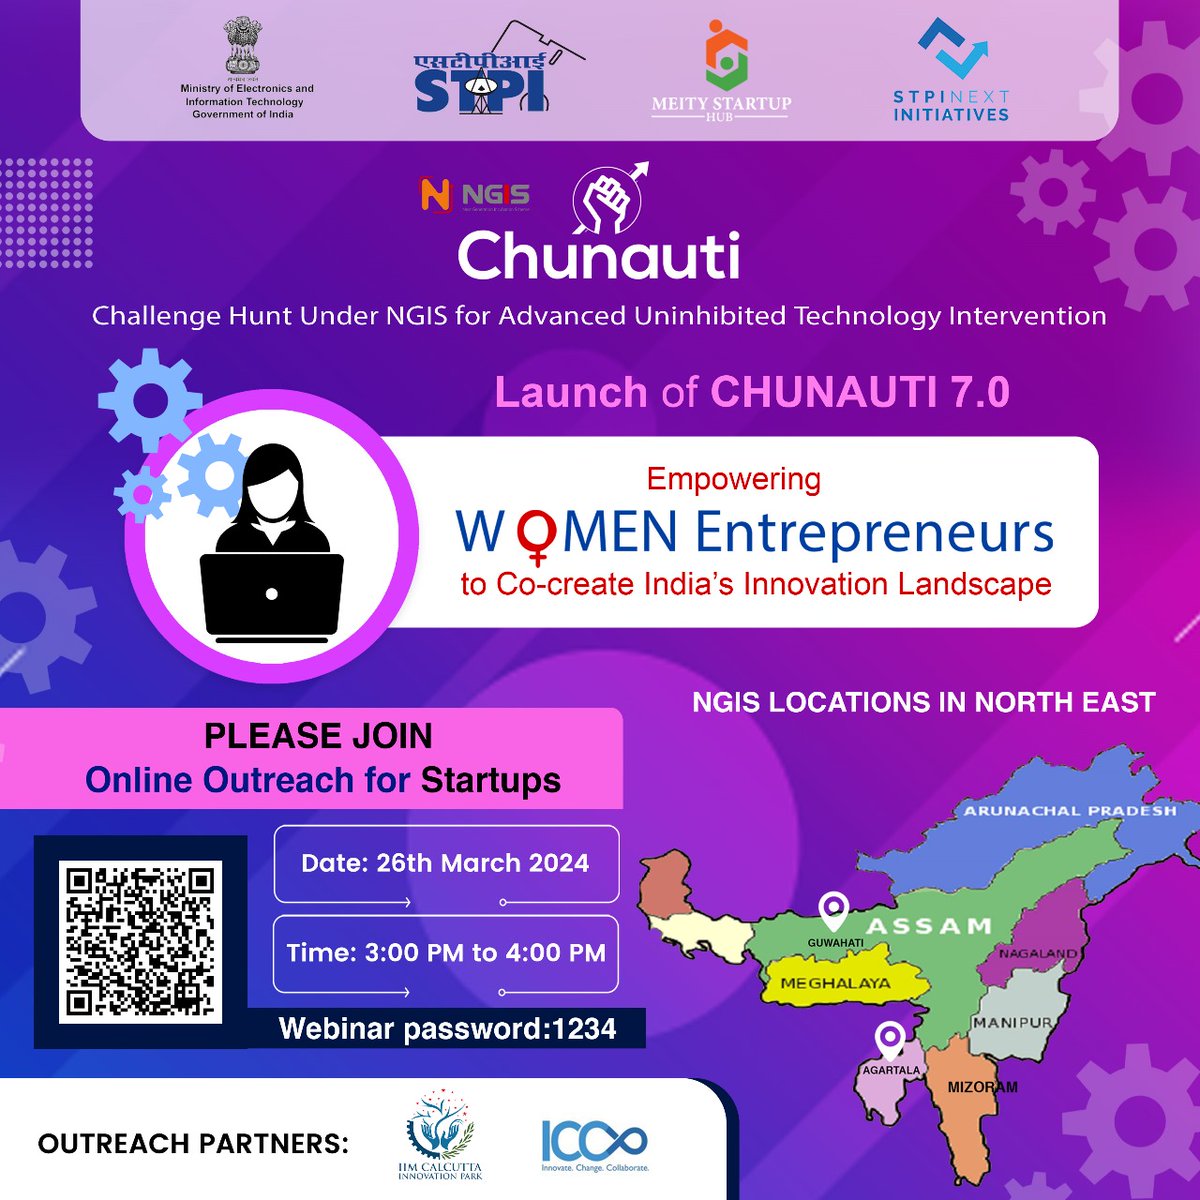 Join us for an online outreach session to be organized by @stpiguwahati in association with @IIMCIP and ICCo on #NGIS #CHUNAUTI7.0, an initiative focusing on Empowering #WomenEntrepreneurs! on 26th March 2024 at 3 PM. Join using URL: bit.ly/43s4AMQ @arvindtw @GoI_MeitY